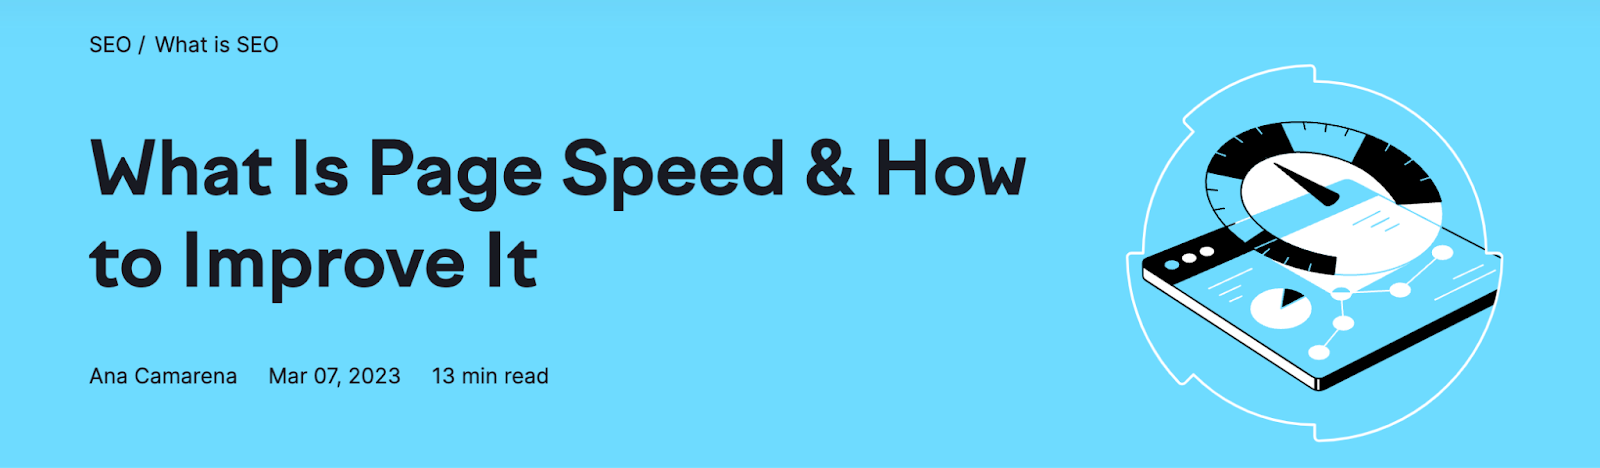 Example of a title that answers the question from Semrush blog "What Is Page Speed & How to Improve It"